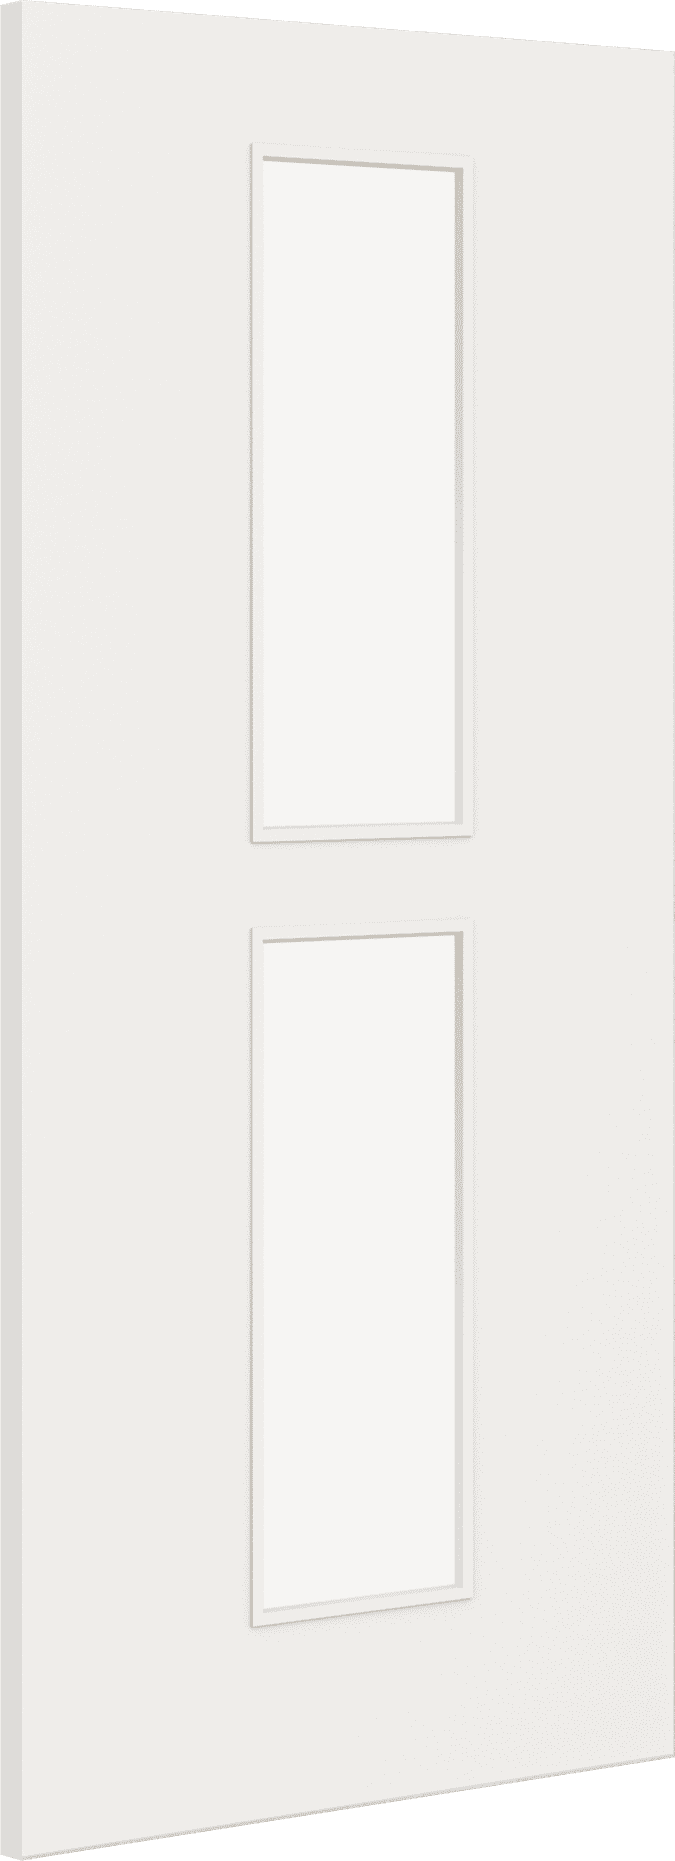 1981mm x 686mm x 44mm (27") Architectural Paint Grade White 12 Frosted Glazed Fire Door Blank